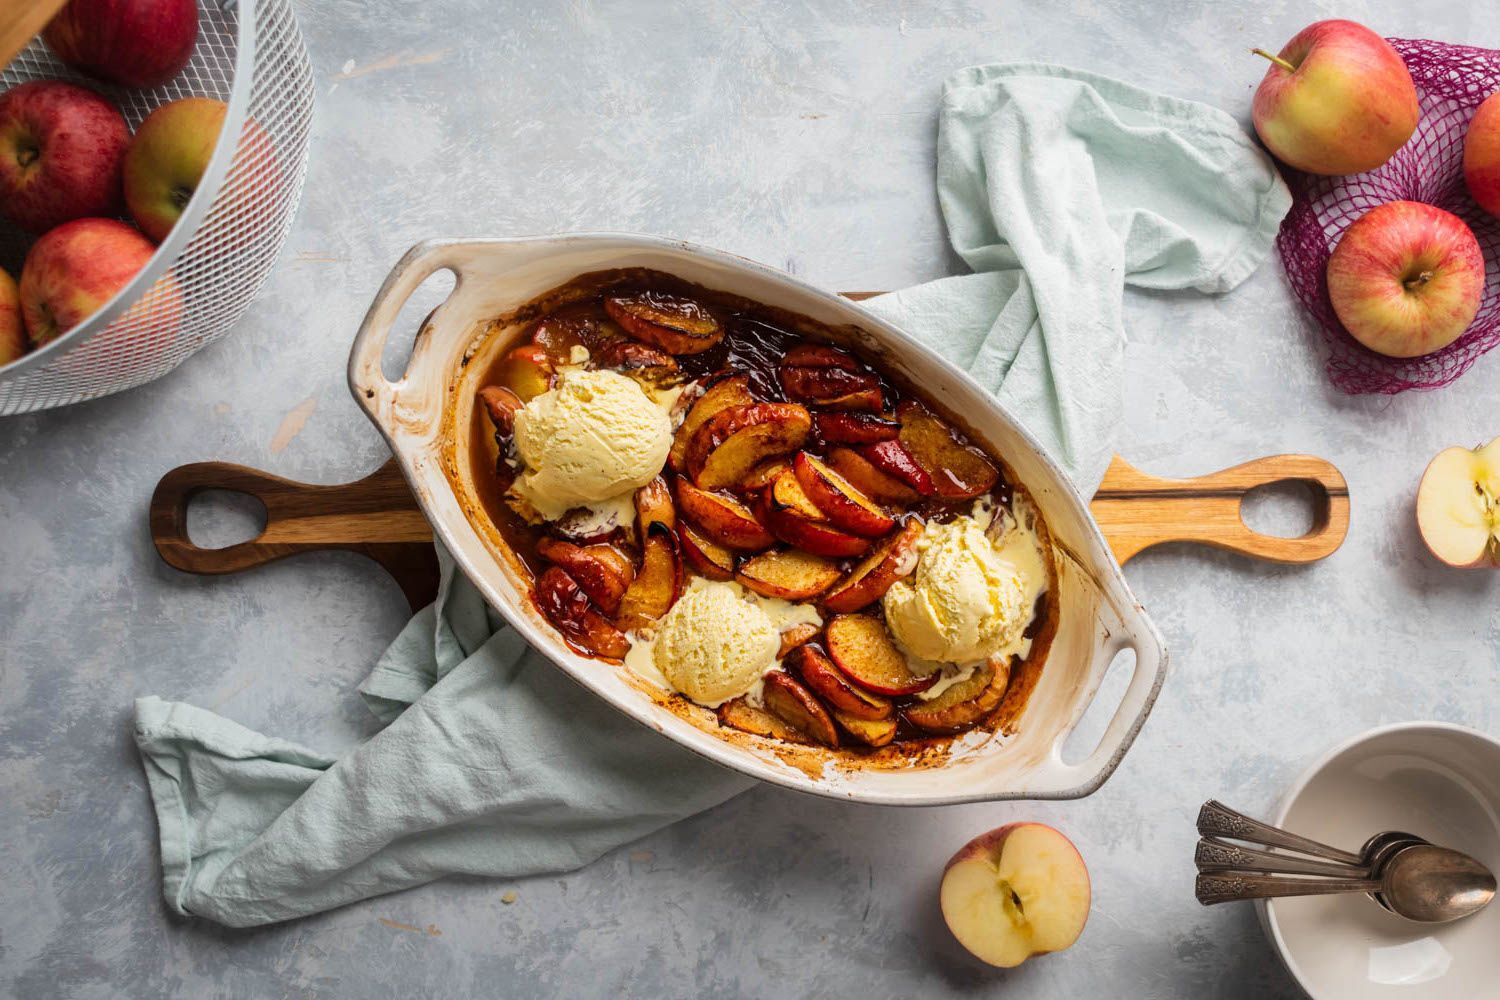 Baked apples in a ceramic baking dish with vanilla ice cream and cinnamon.